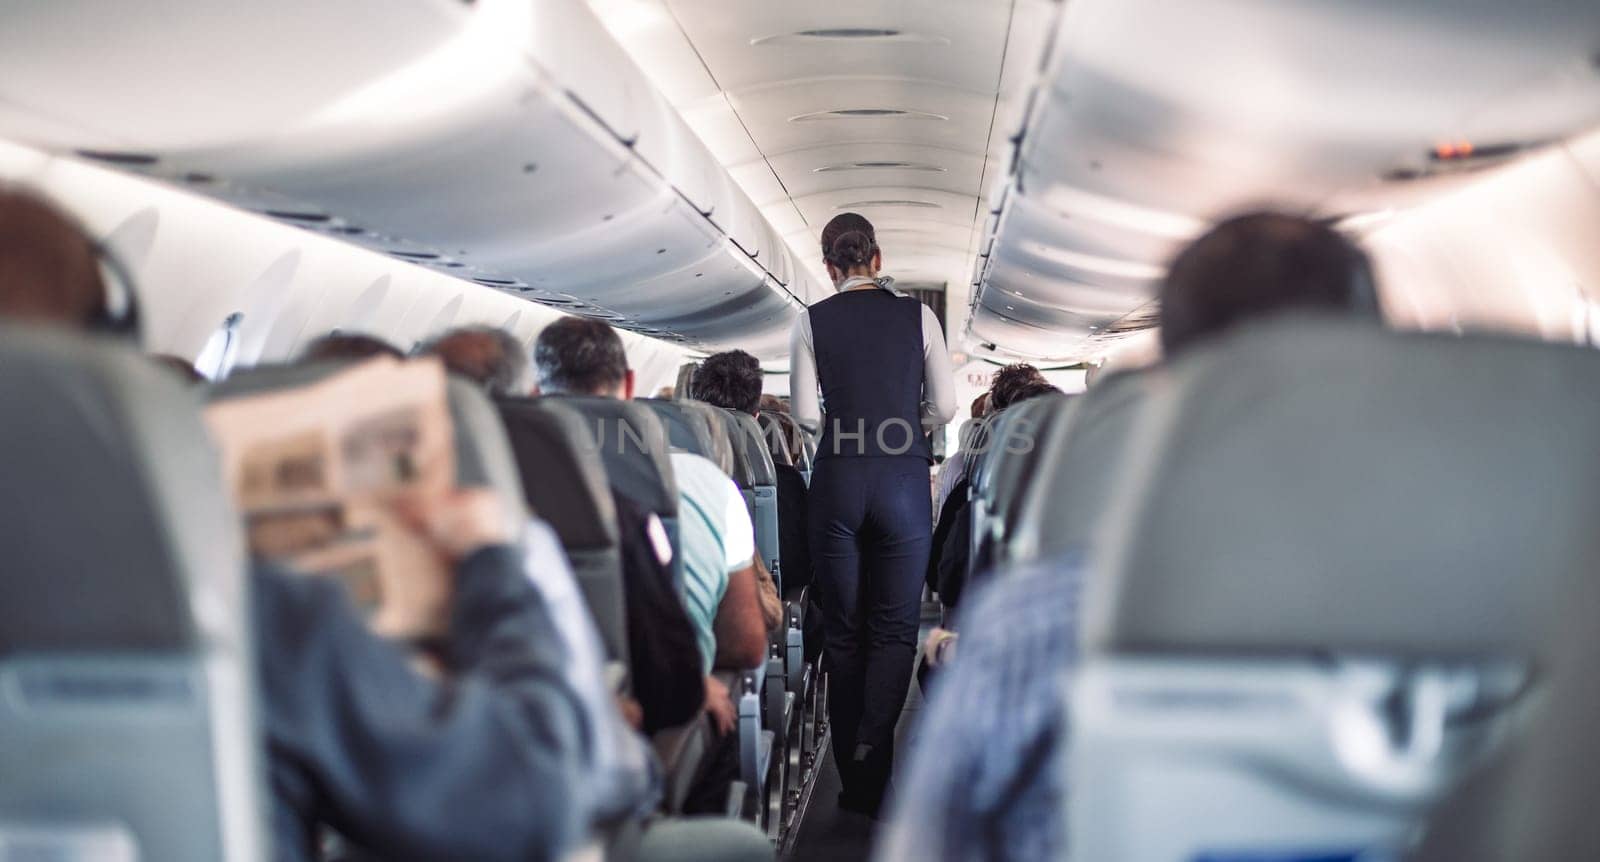 Interior of airplane with passengers on seats and stewardess in uniform walking the aisle, serving people. Commercial economy flight service concept. by kasto